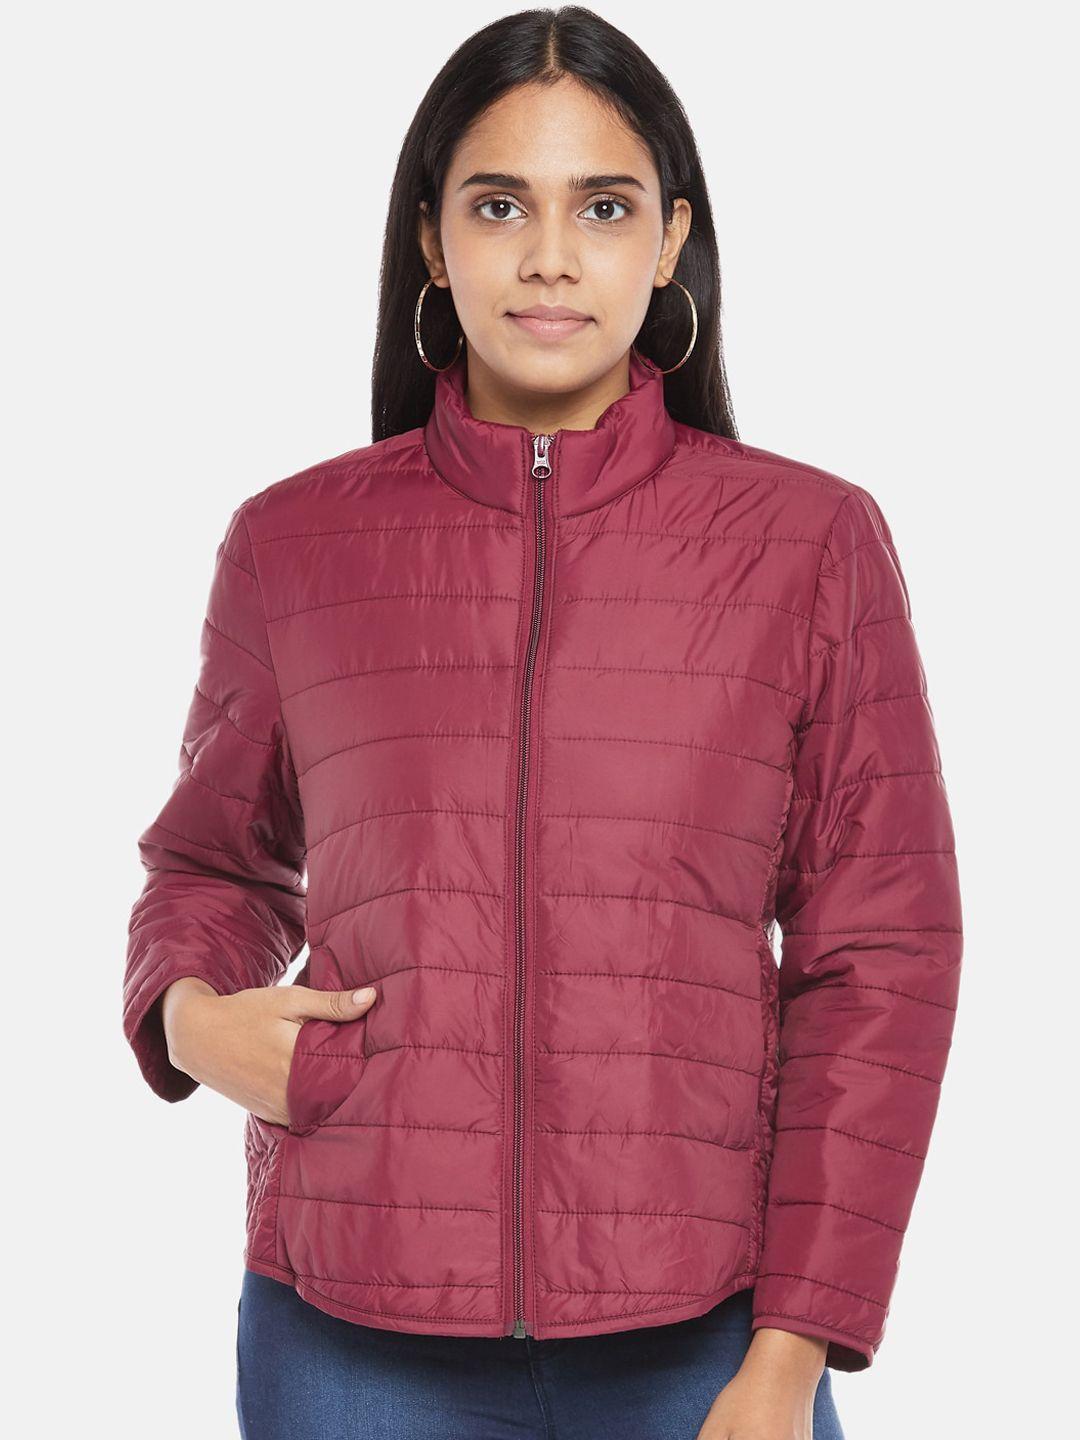 honey by pantaloons women red puffer jacket